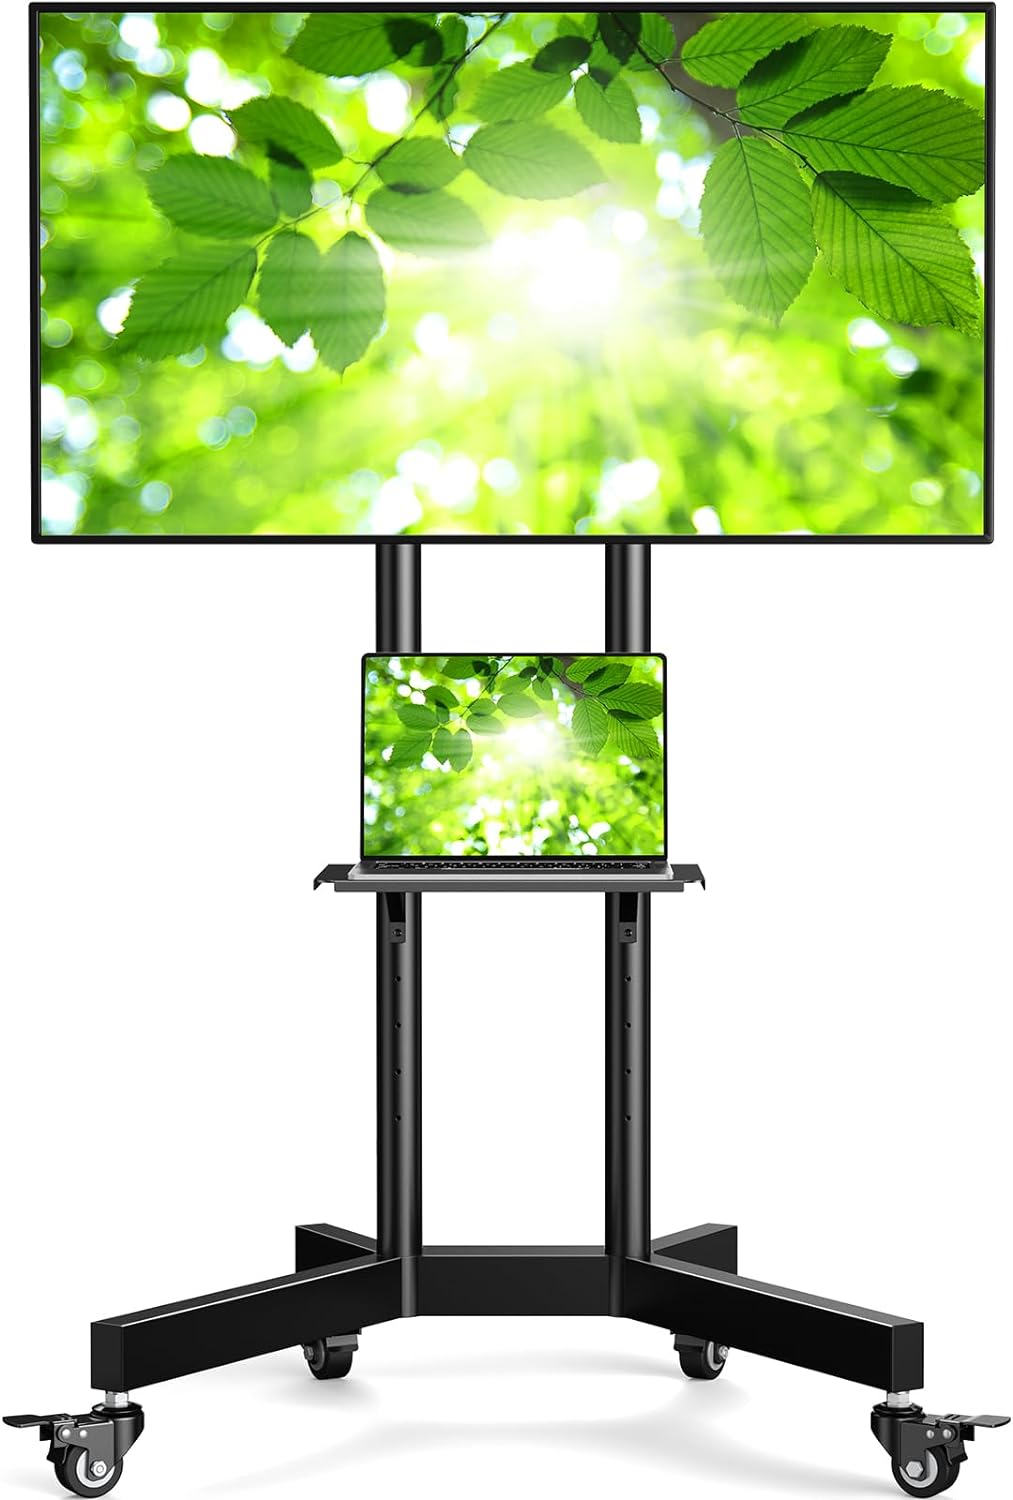 Perlegear Rolling TV Stand for 32-85 Inch Screens up to 132 lbs, Height Adjustable Mobile TV Stand for LCD OLED 4K Flat/Curved Panels, TV Cart Outdoor TV Stand with Lockable Wheels Max VESA 600x400